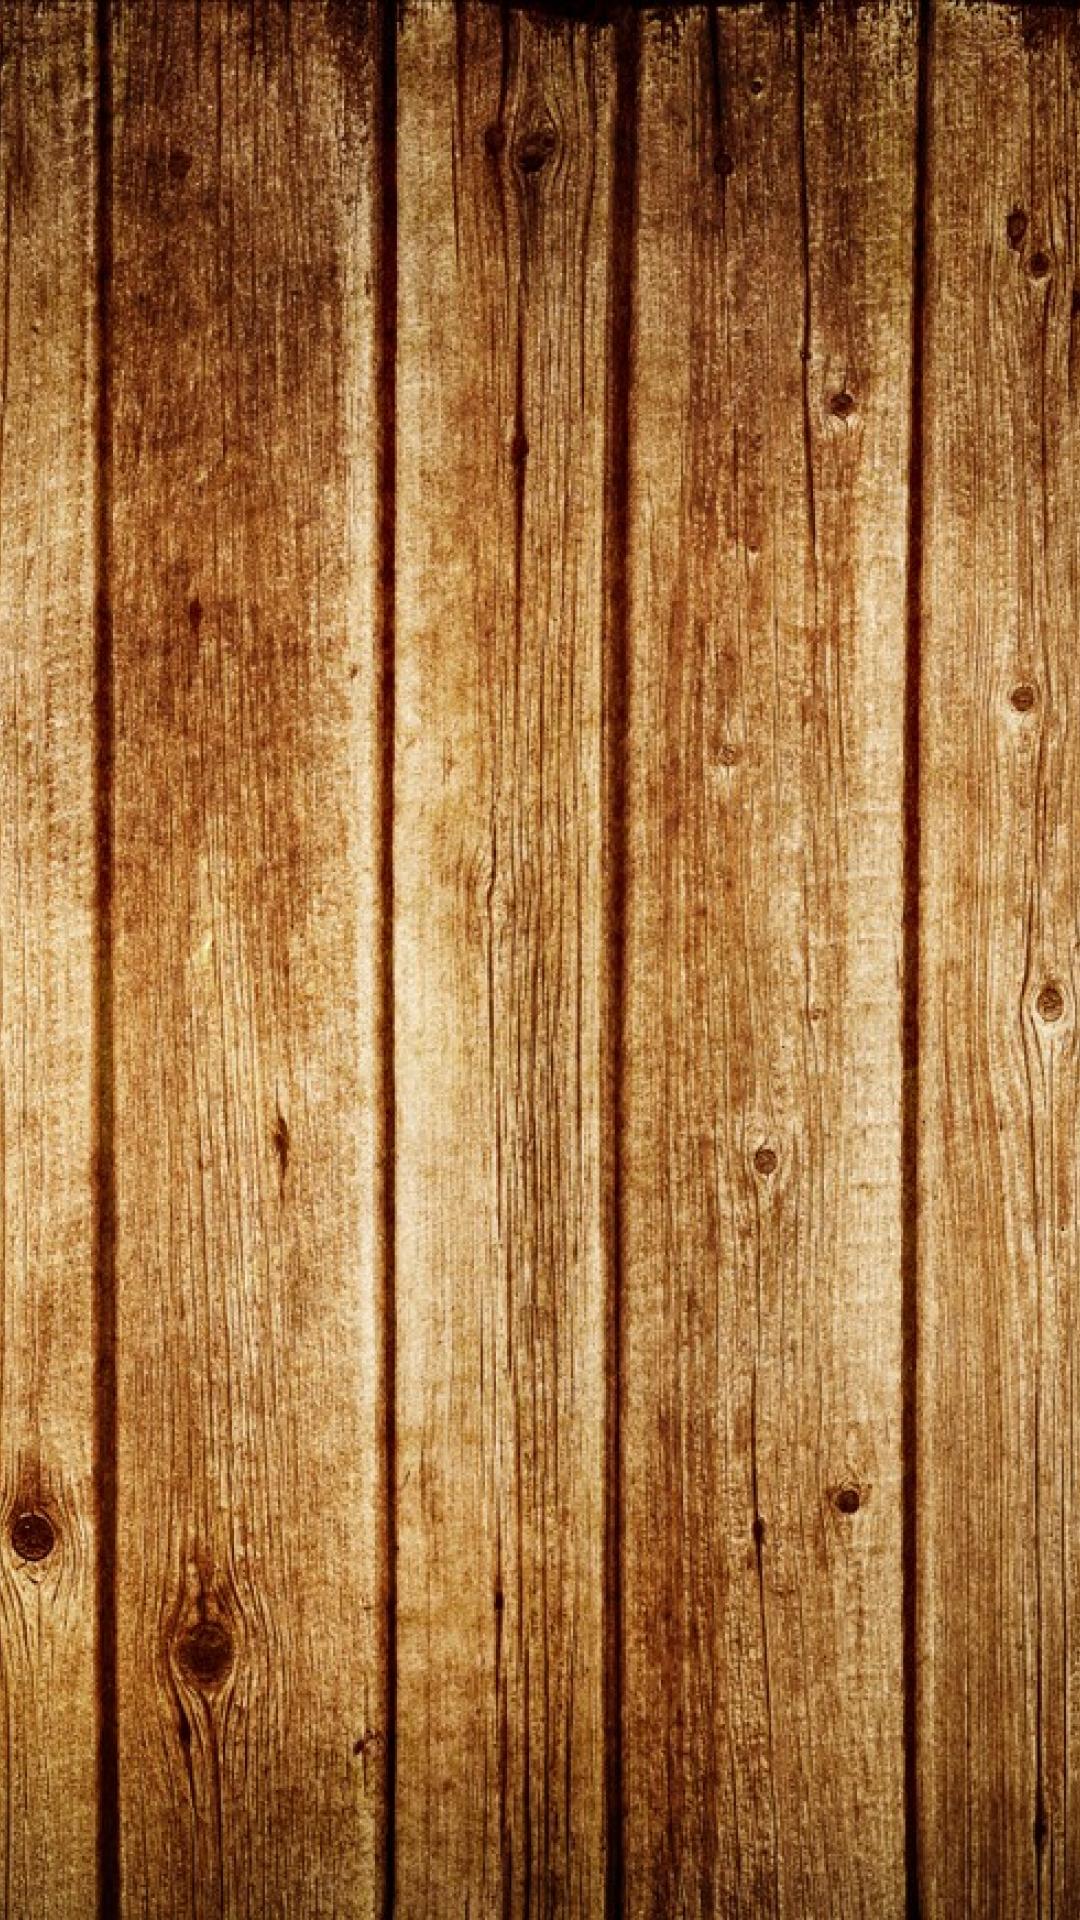 Wooden background high resolution wood iphone 6 plus 1080x1920 wallpaper